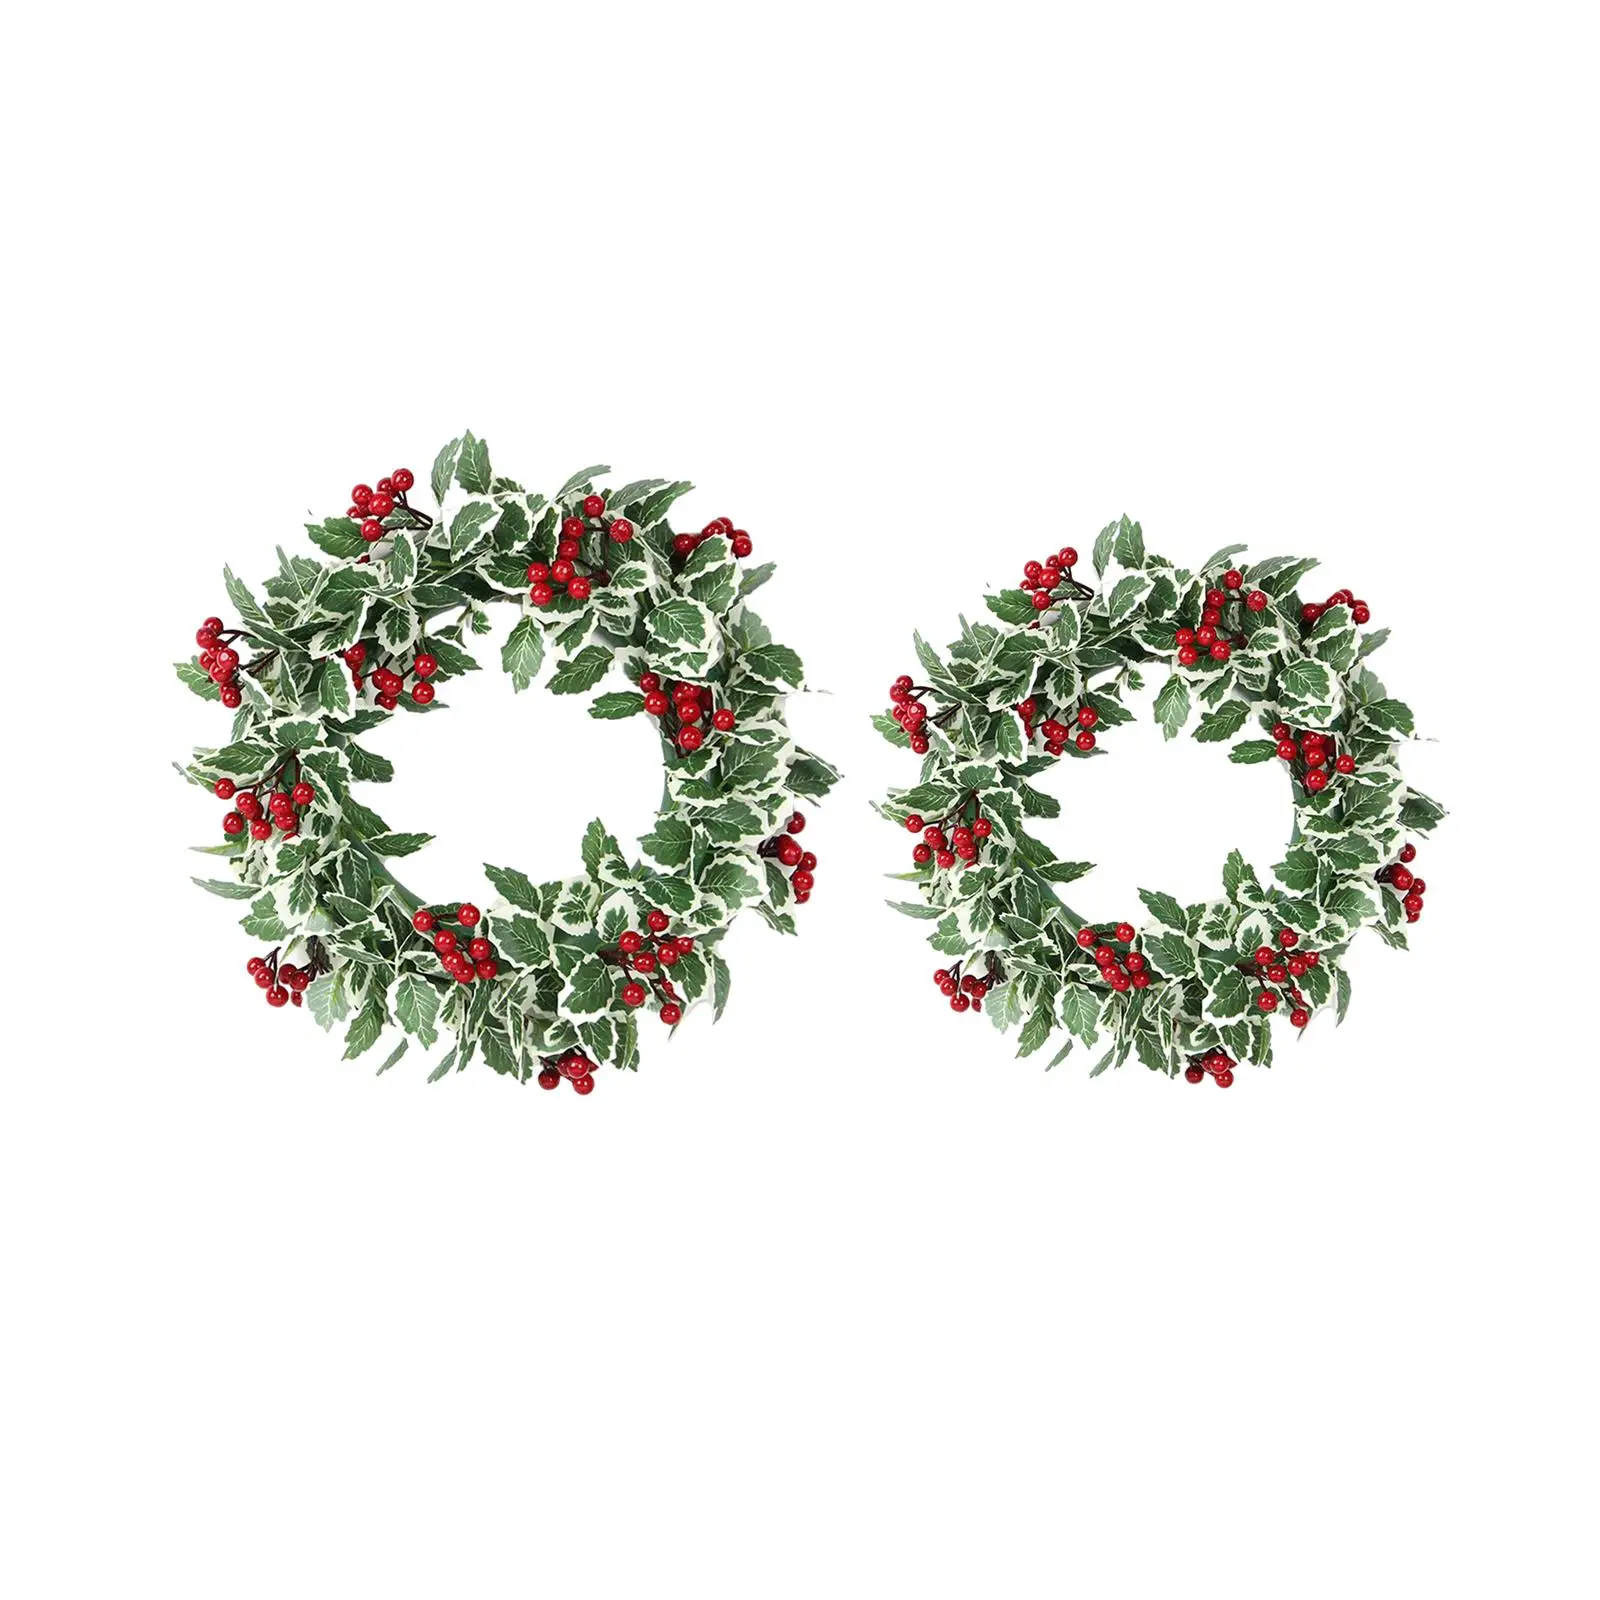 Artificial Christmas Wreath Door Ornaments Indoor Outdoor Holiday Garland Decoration for Wedding Party Wall Fireplace Garden